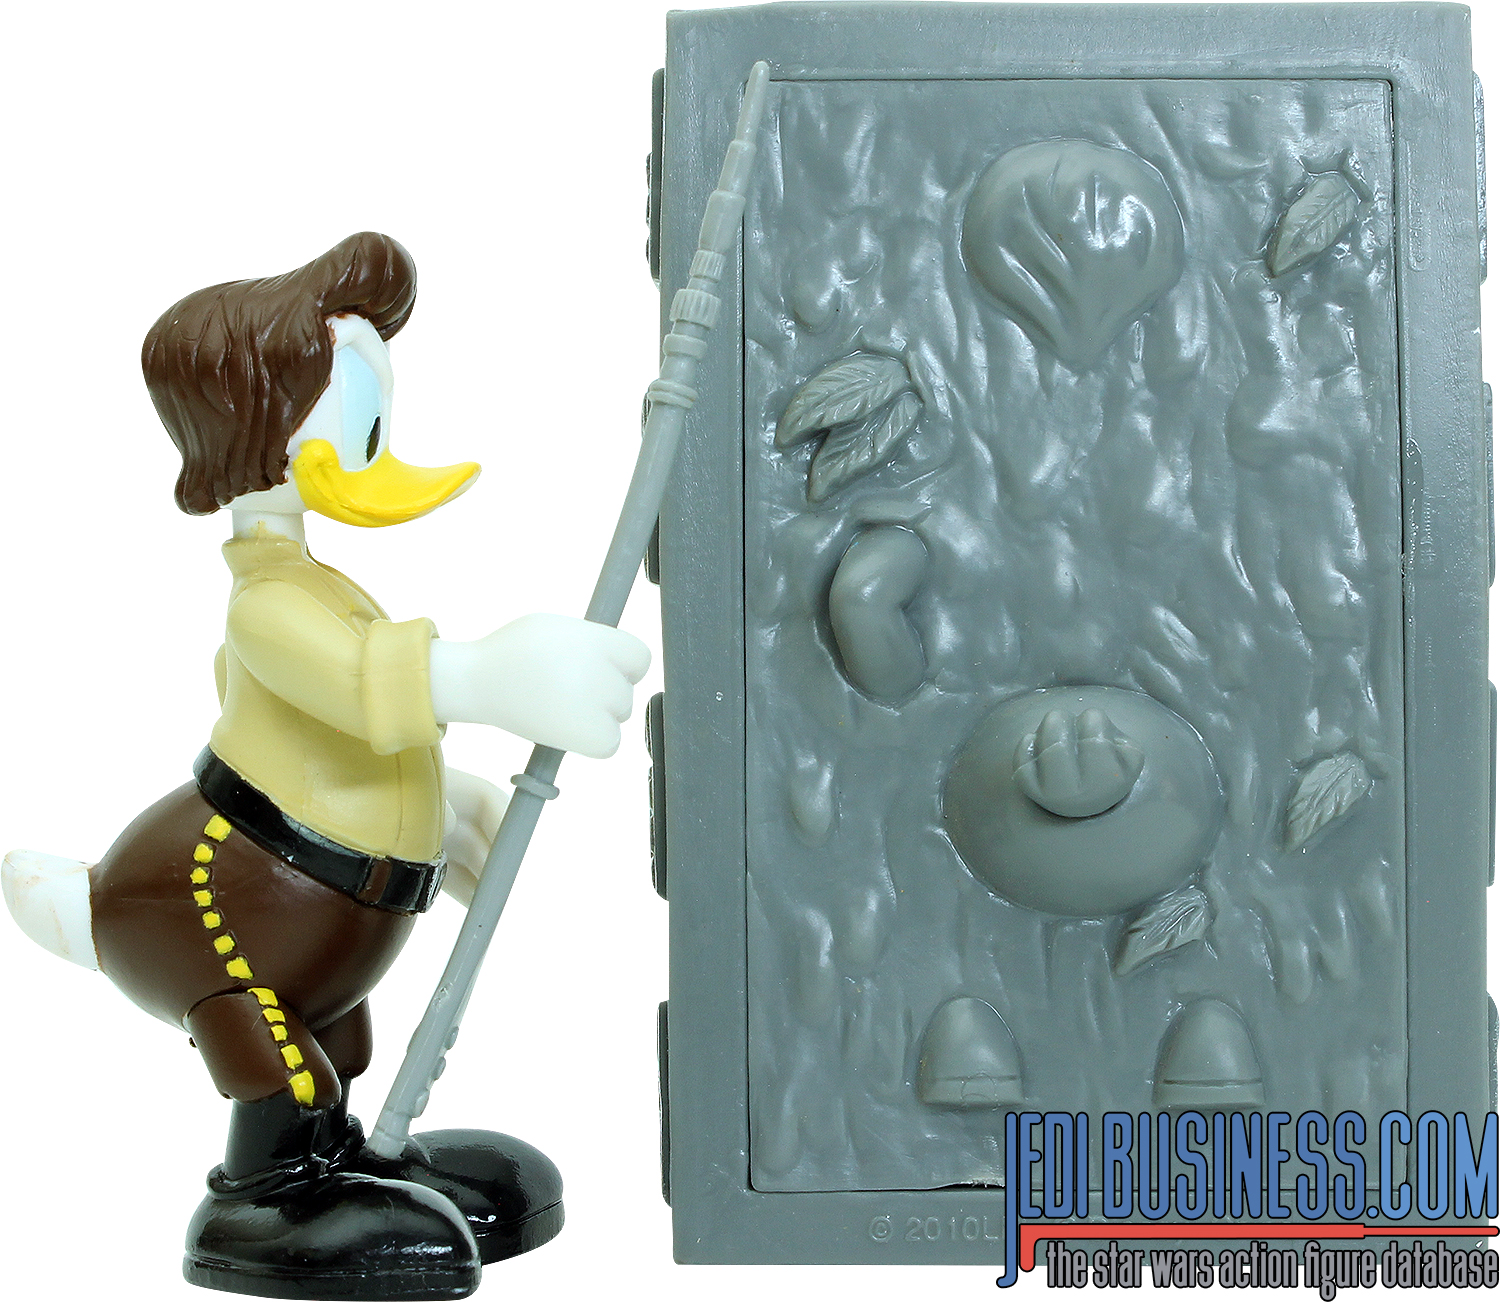 Donald Duck Series 4 - Donald Duck As Han Solo In Carbonite